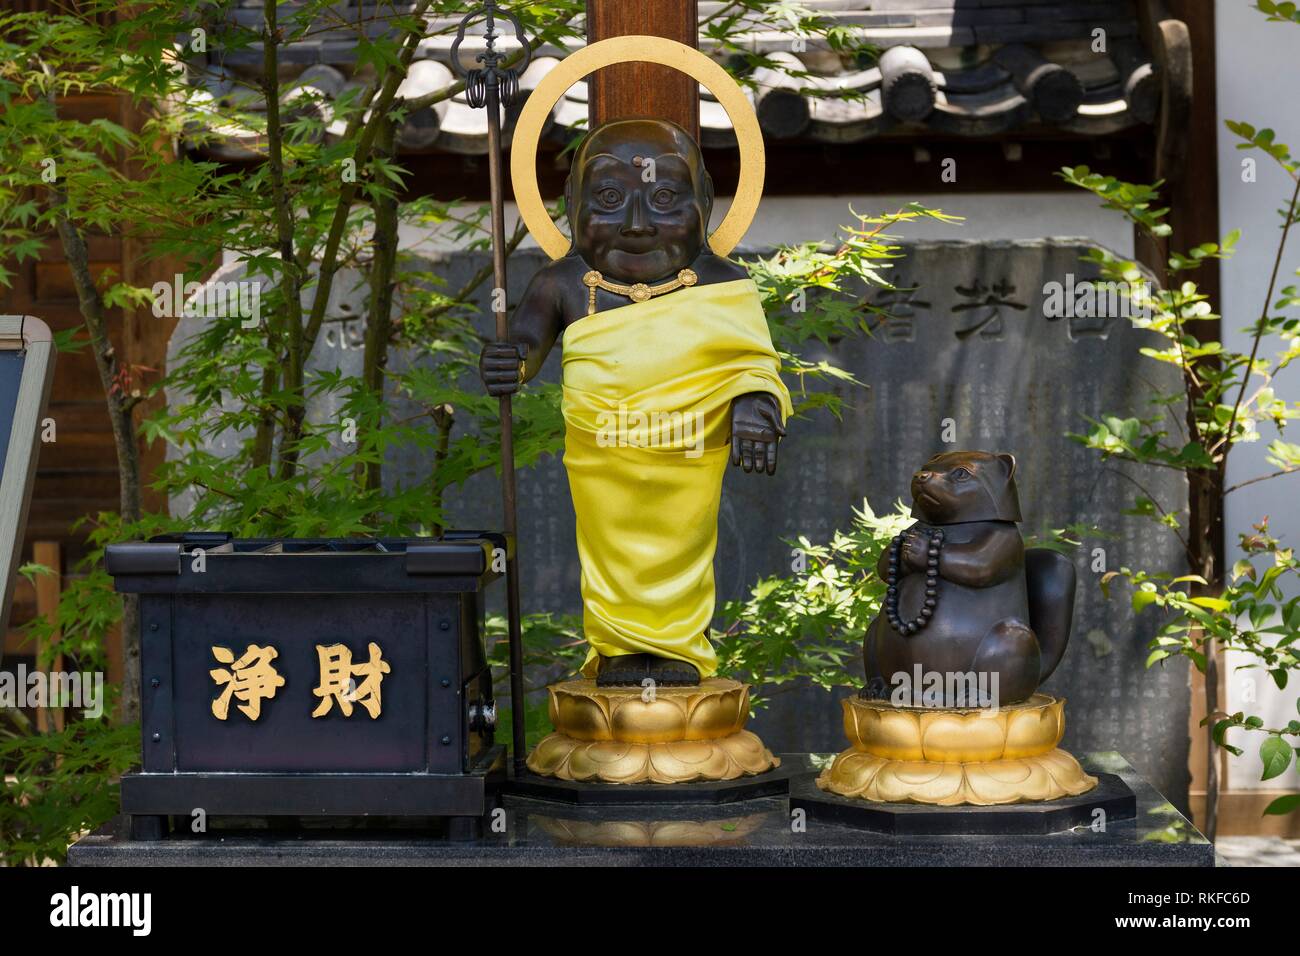 Statue of the monk and Mujina, a devoted raccoon dog, at the Buddhist Zenkoji temple according to the legend. Stock Photo